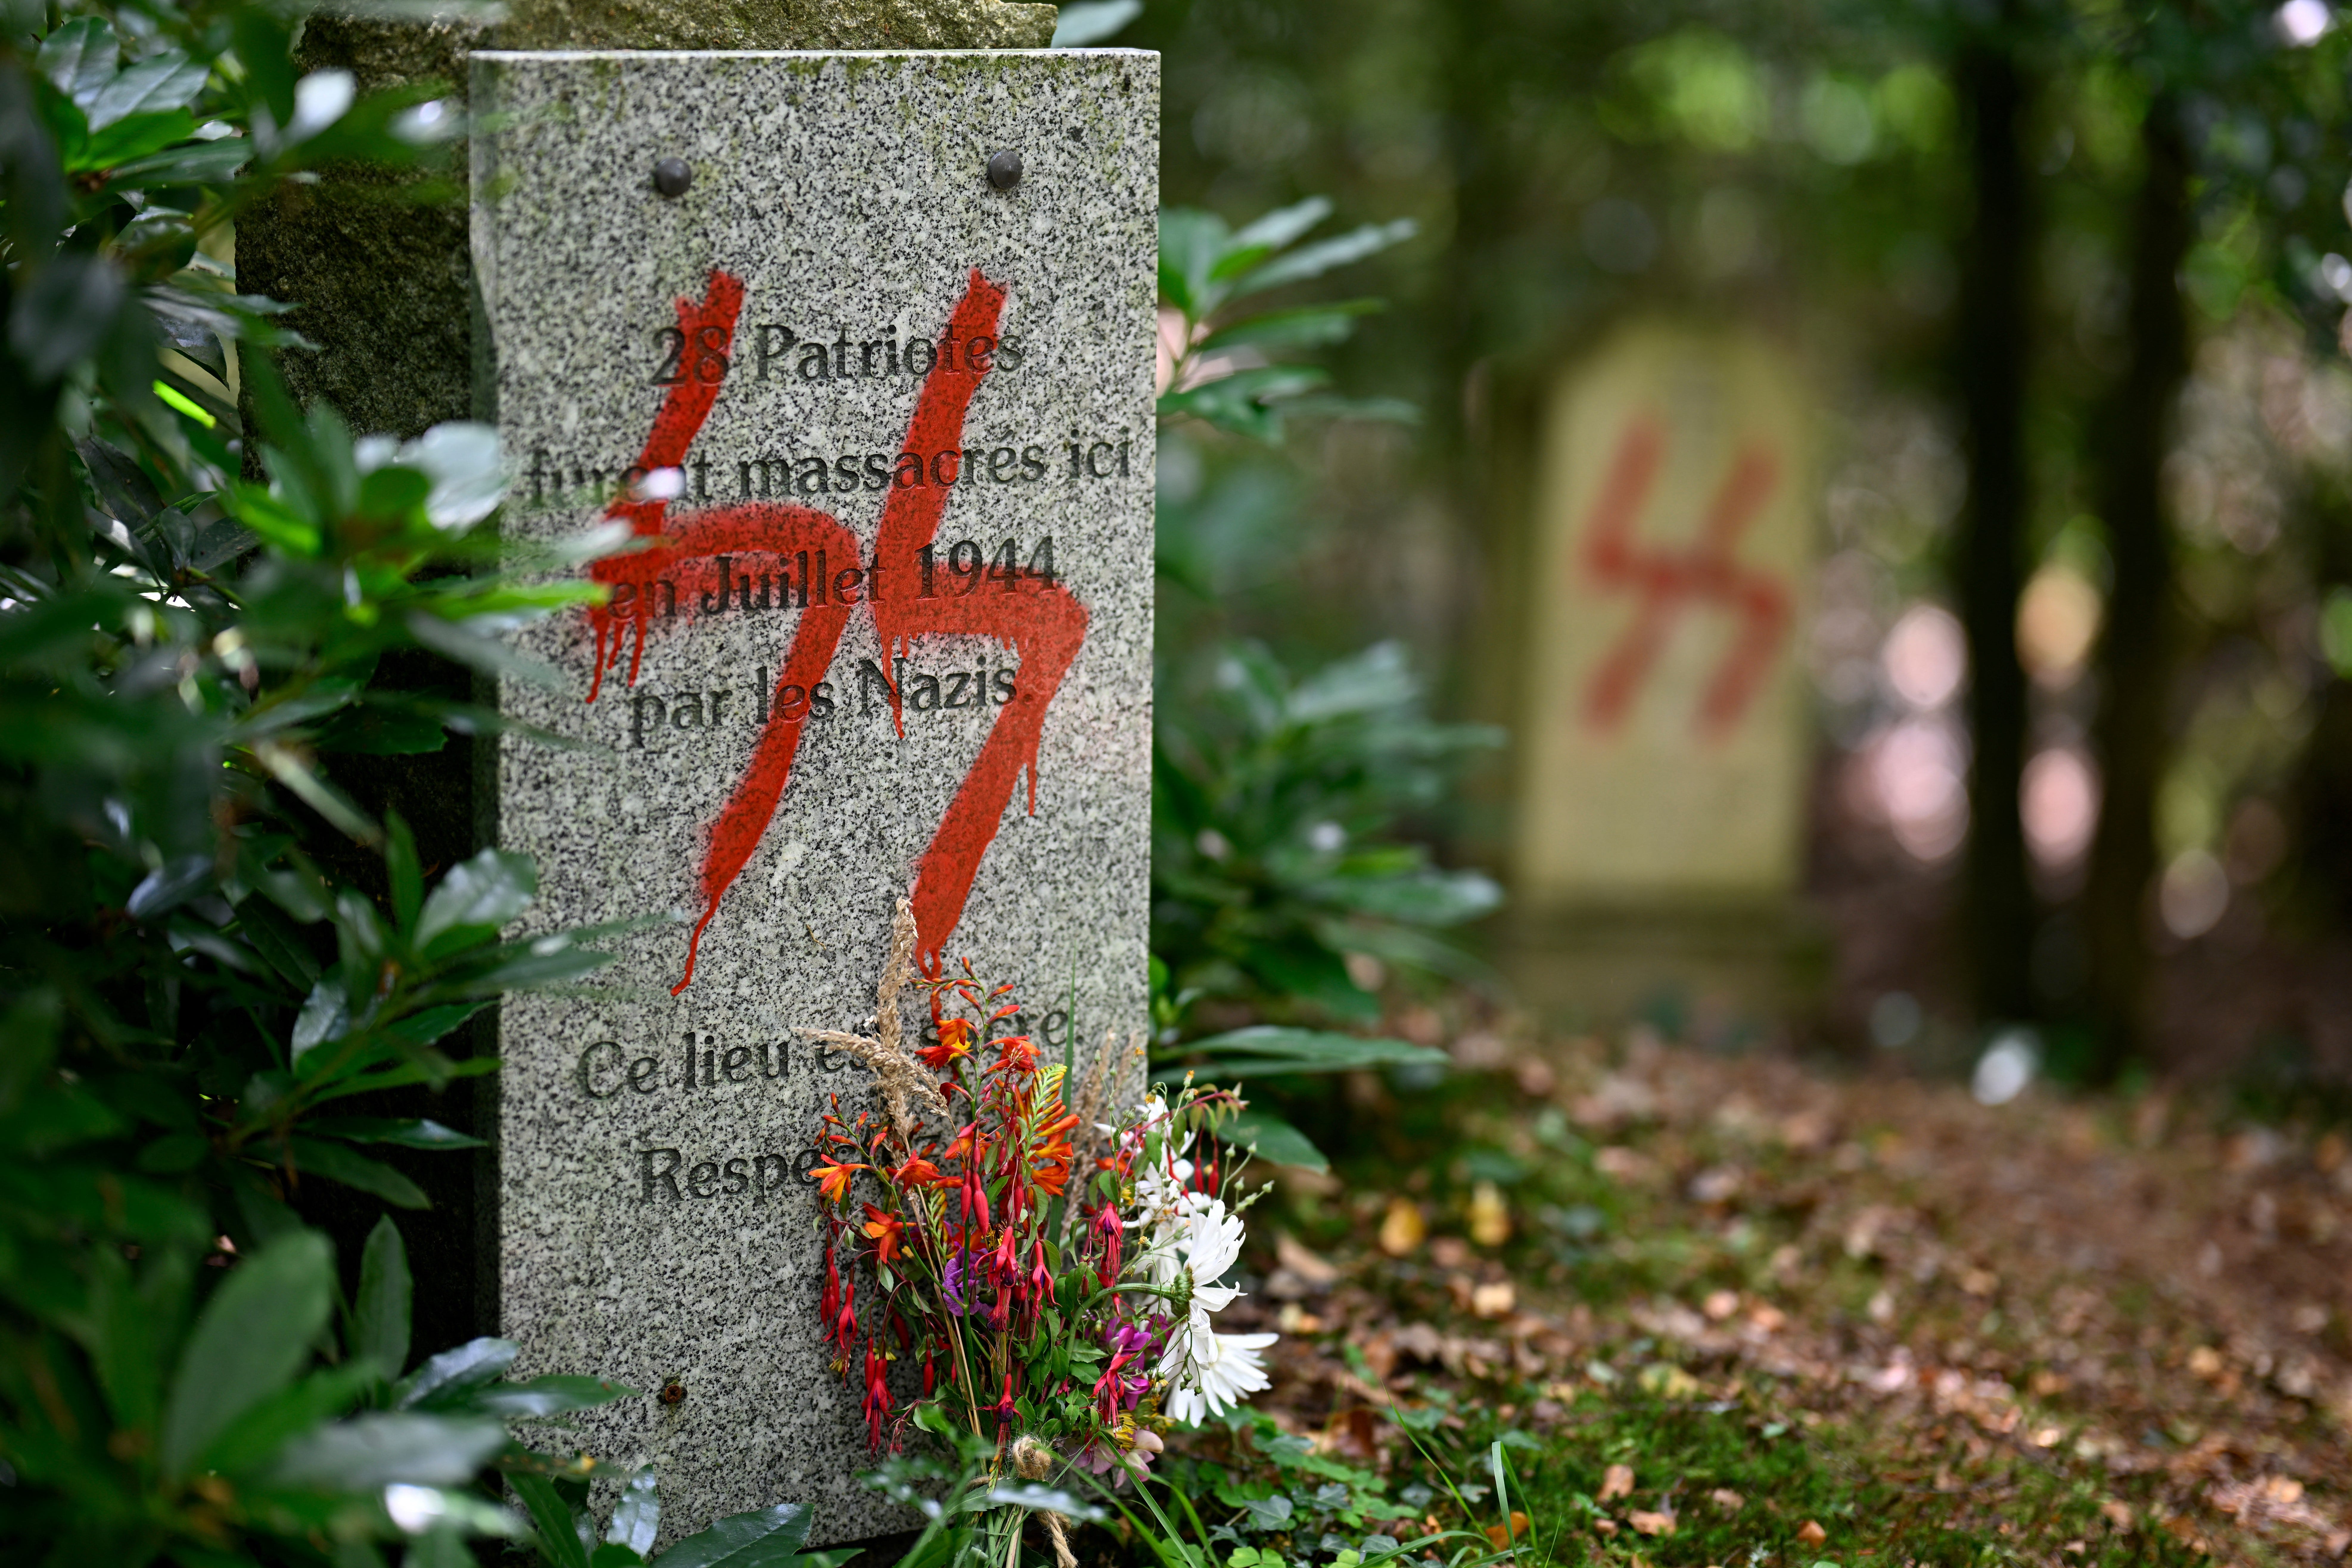 This picture taken on July 17, 2023 shows a graffito of a Nazi SS symbol on a monument in memory of 55 people executed at this site by the Nazis in 1944 during World War II, in Ploeuc-L'Hermitage, some 20km south of Saint-Brieuc, western France.